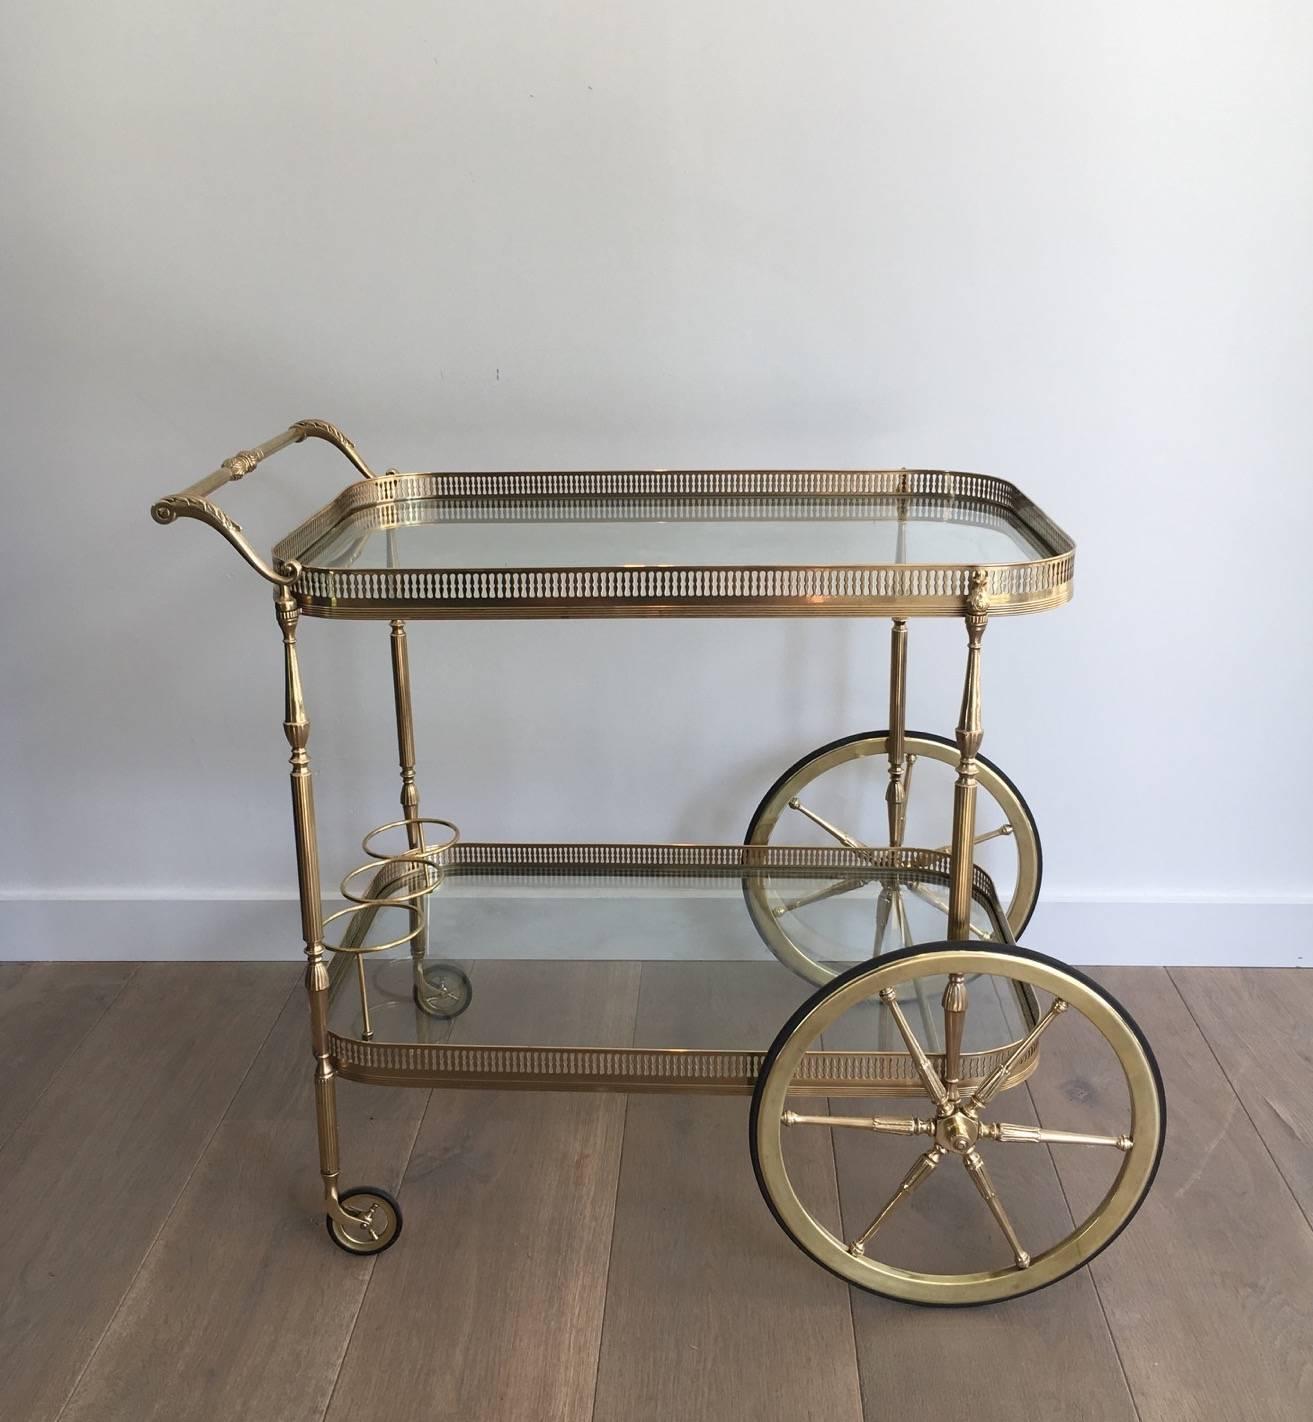 Excellent rolling brass bar cart with clear glass shelves in the neoclassical style.

This item is currently in France, please allow 2 to 4 weeks delivery to New York. 
Shipping costs from France to our warehouse in New York included in the price.